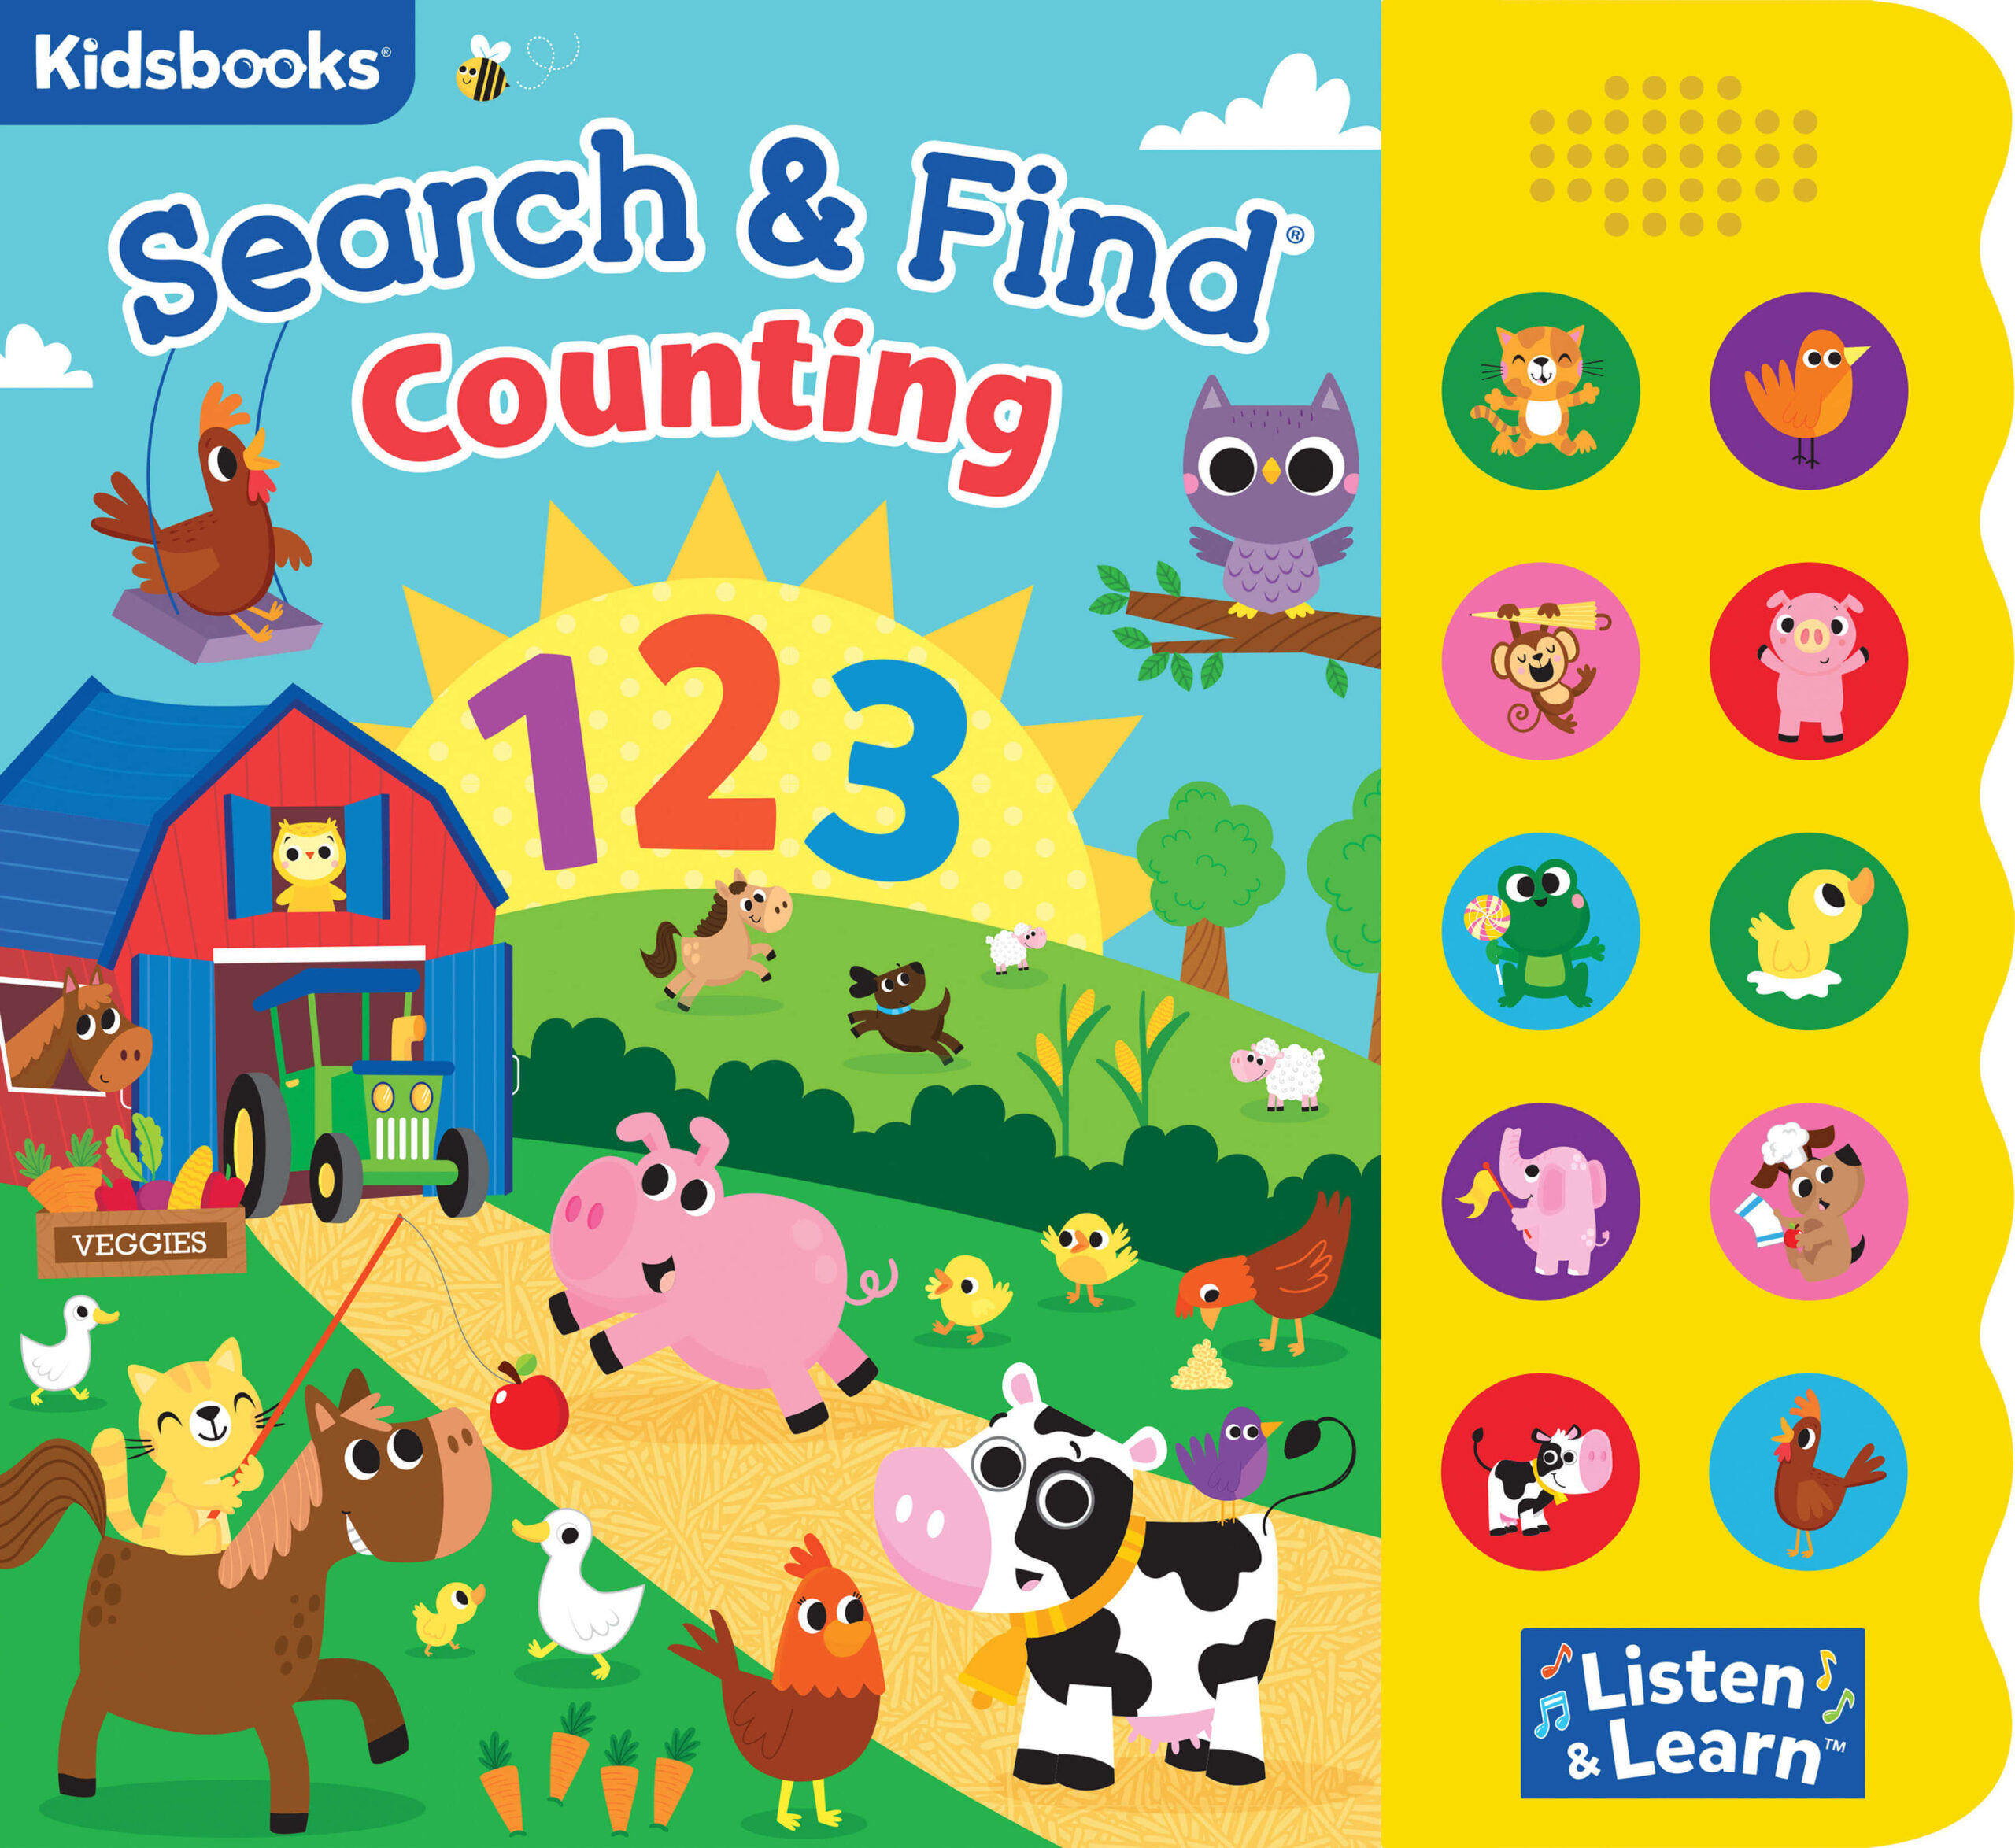 Search & Find: Counting